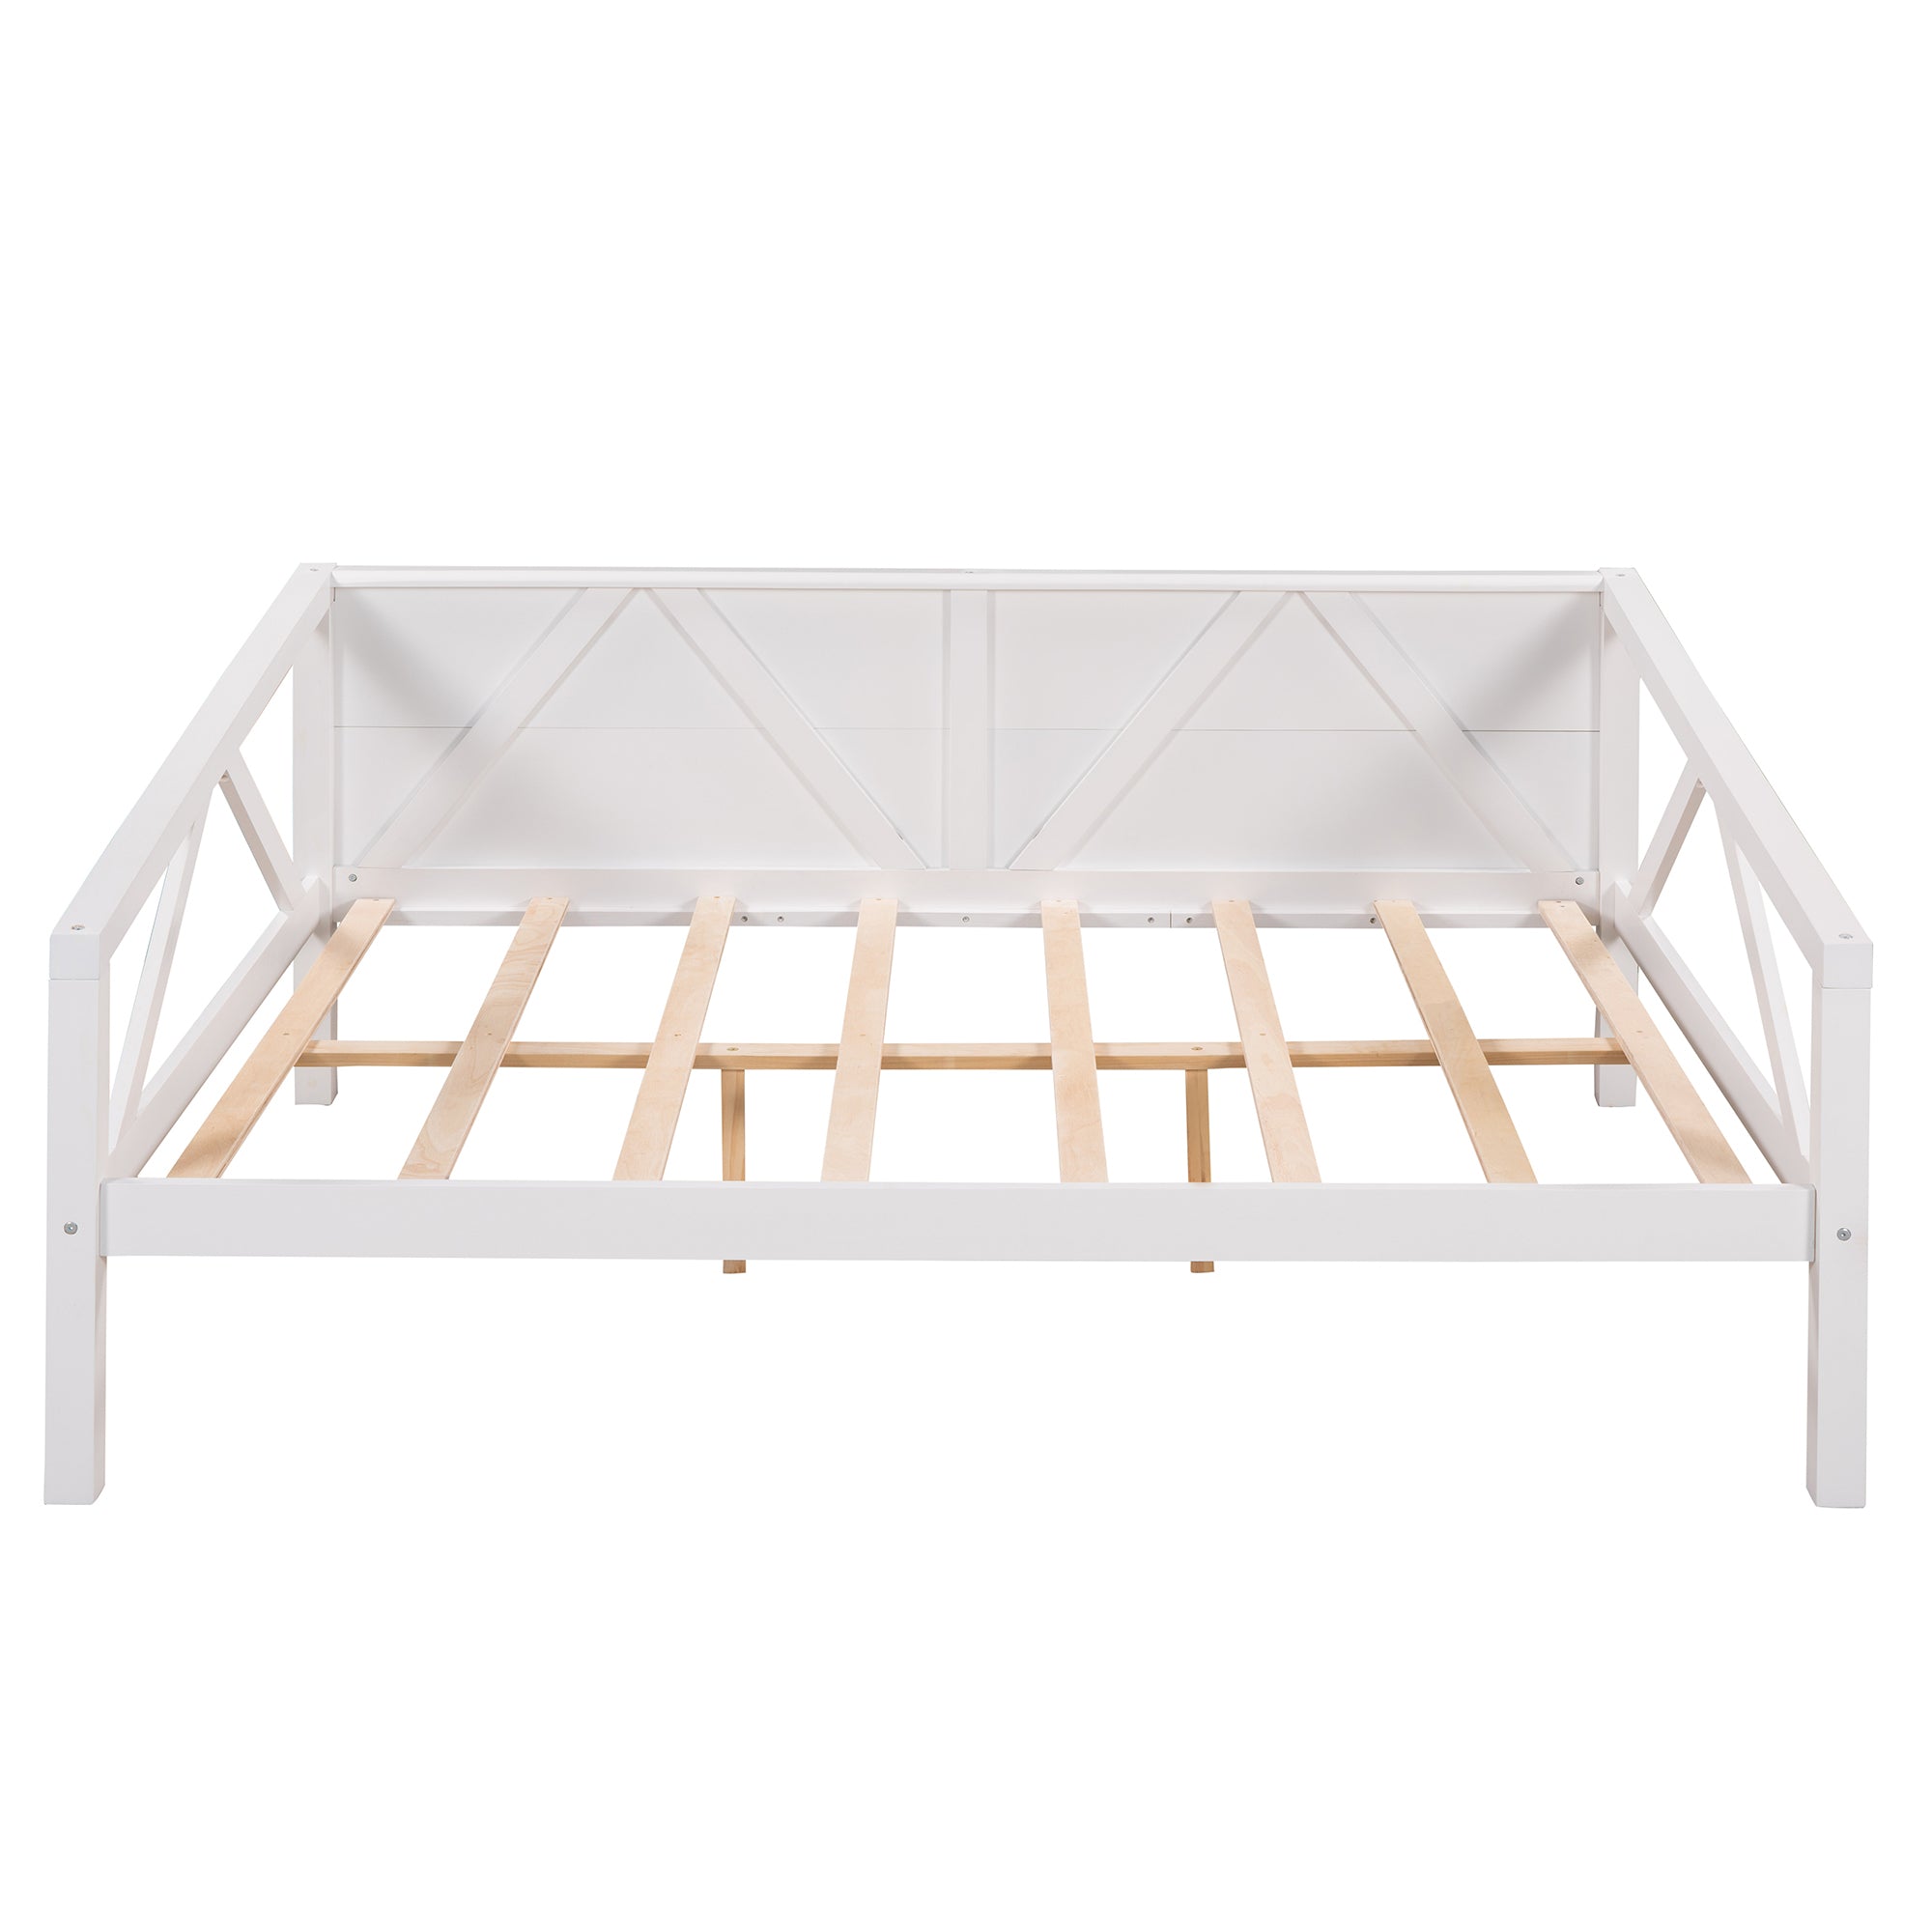 Full size Daybed, Wood Slat Support, White white-solid wood